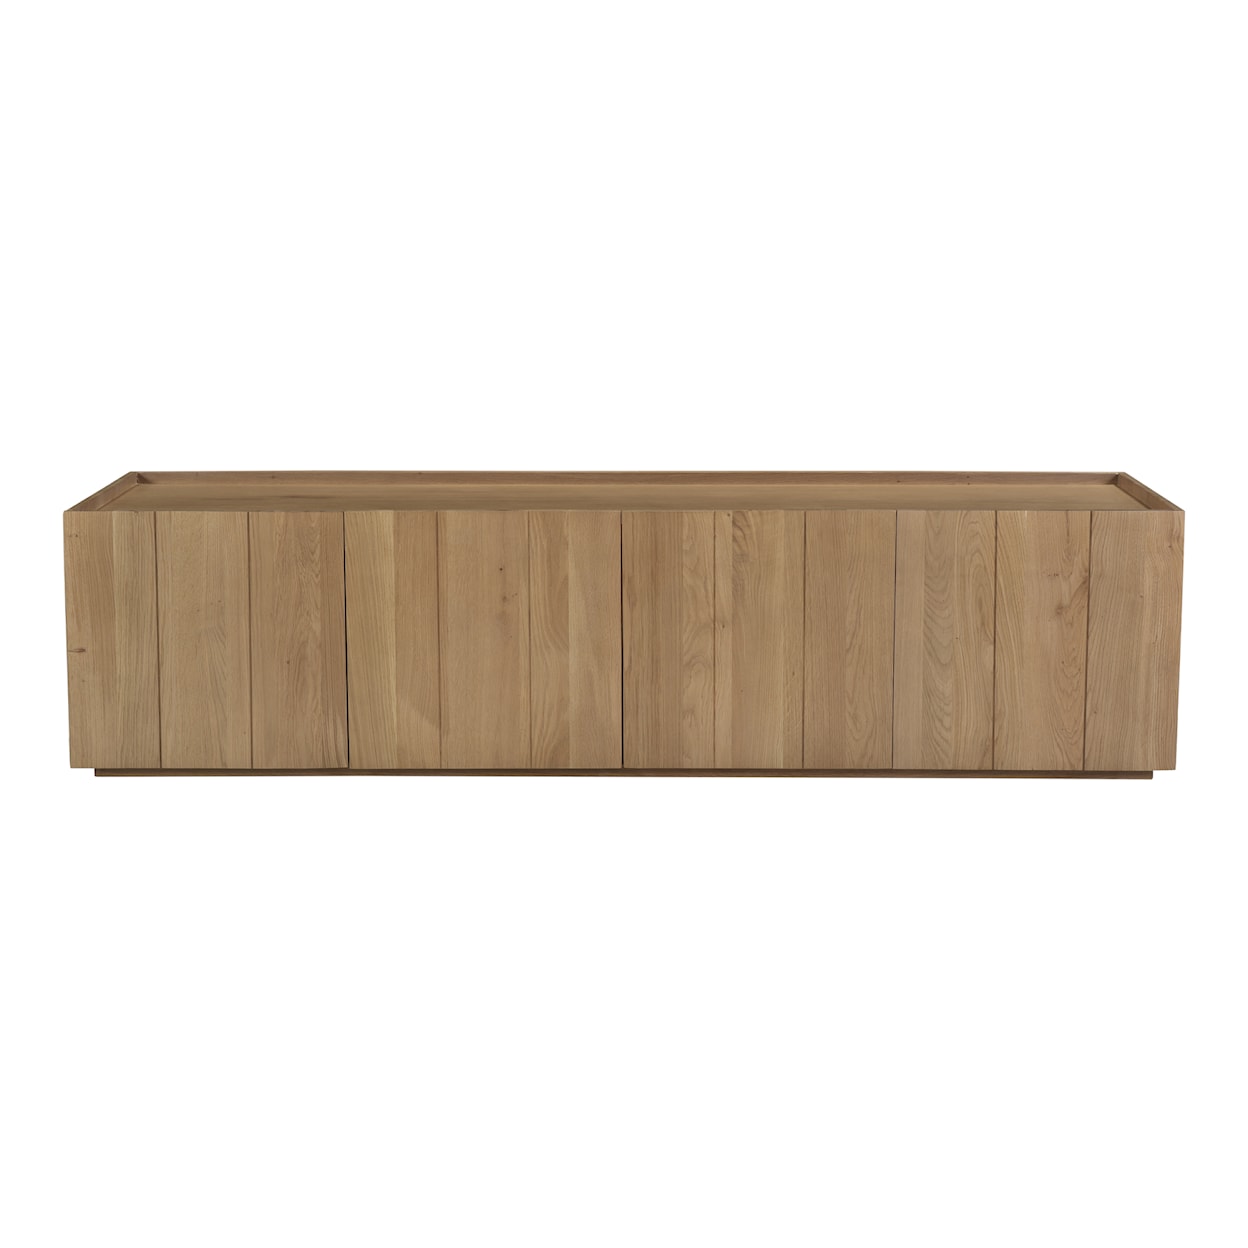 Moe's Home Collection Plank Plank Media Cabinet Natural